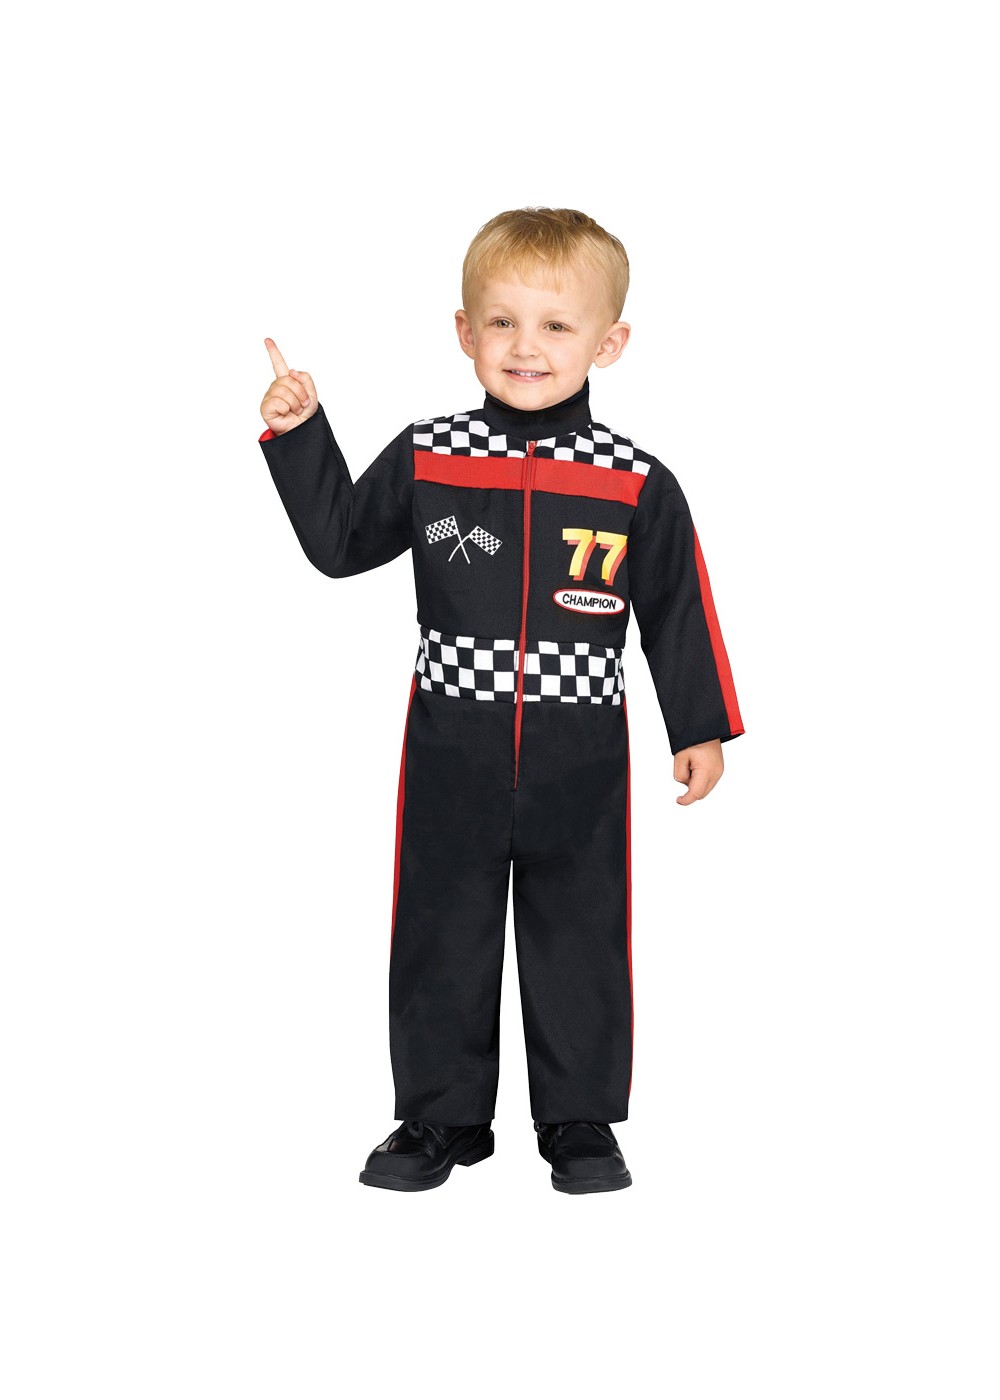 Toddlers Race Car Driver Costume